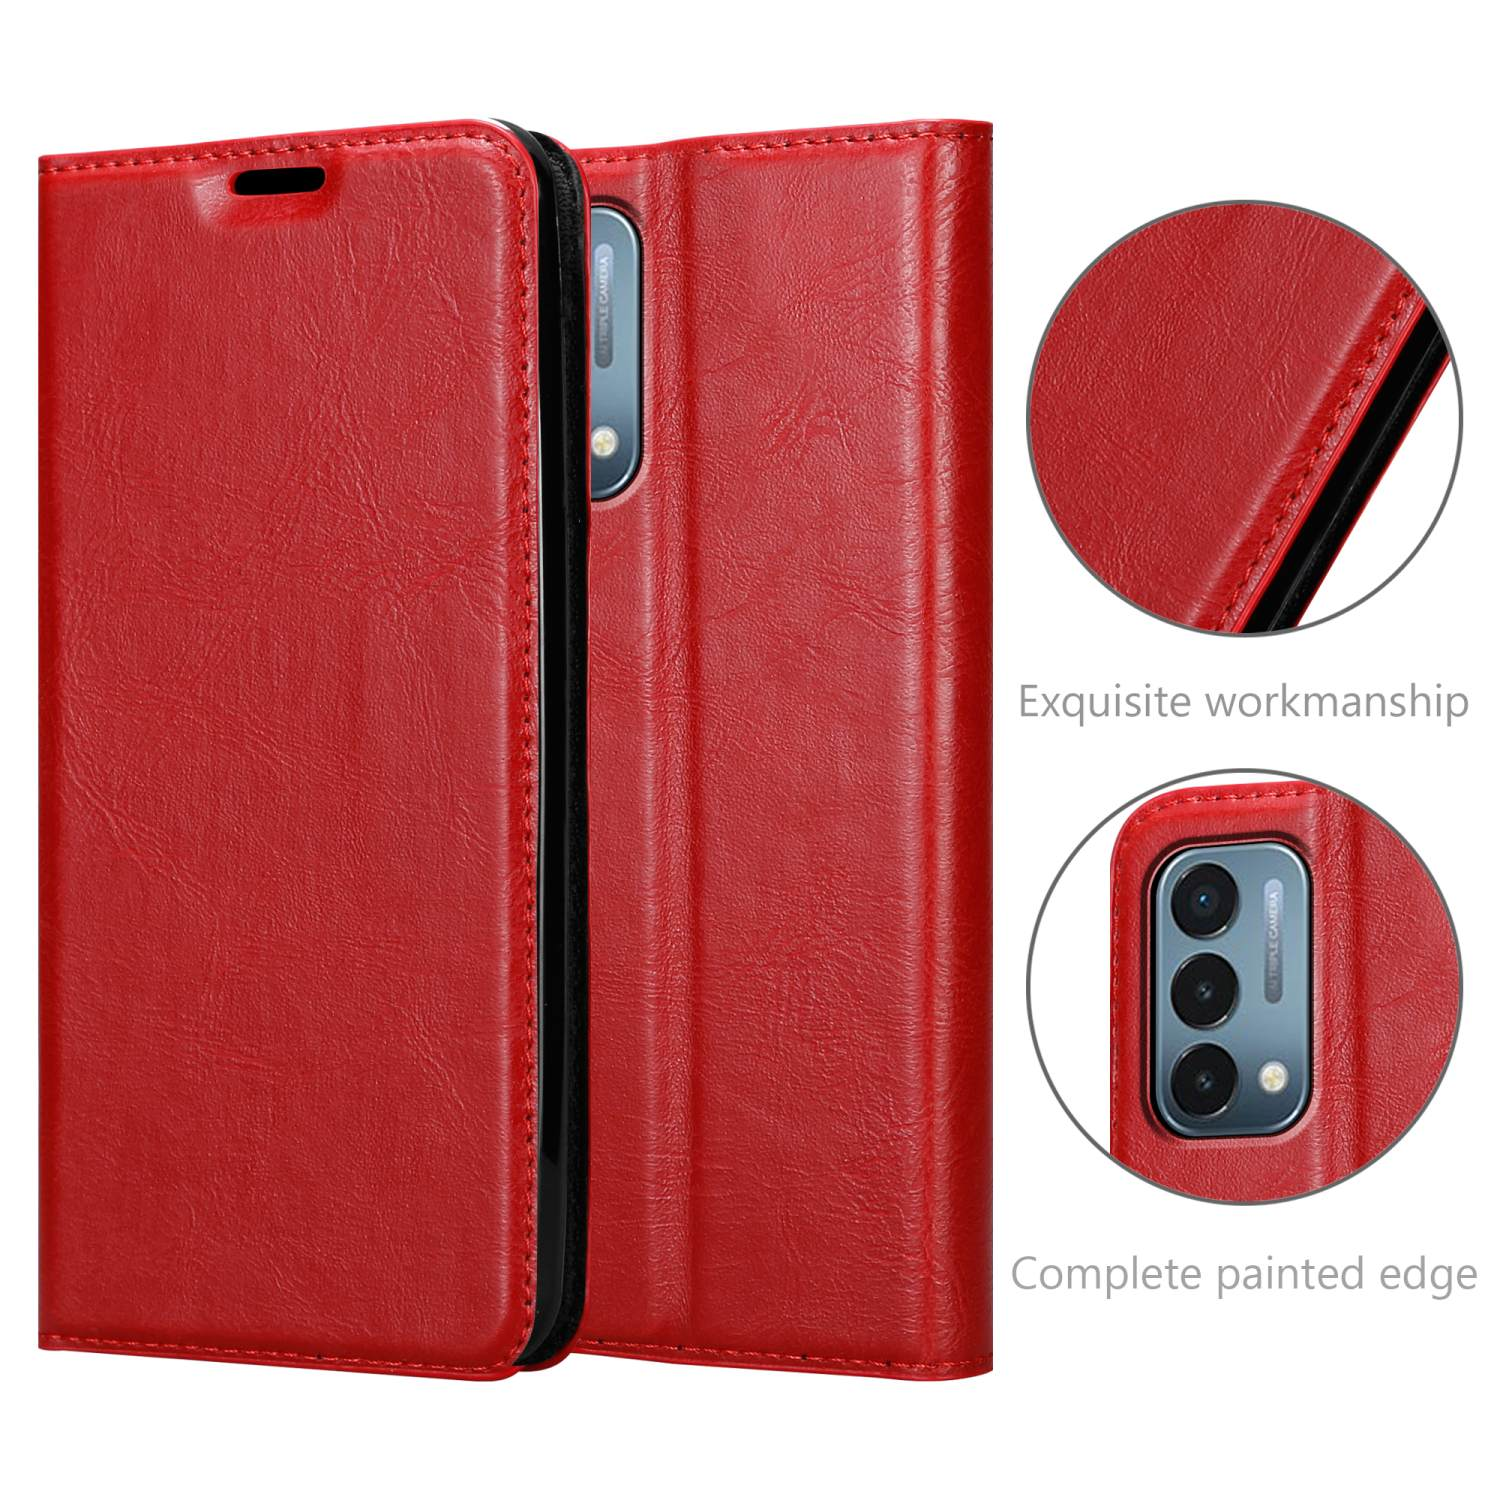 Bookcover, 5G, ROT APFEL Book OnePlus, Magnet, CADORABO Invisible Nord Hülle N200